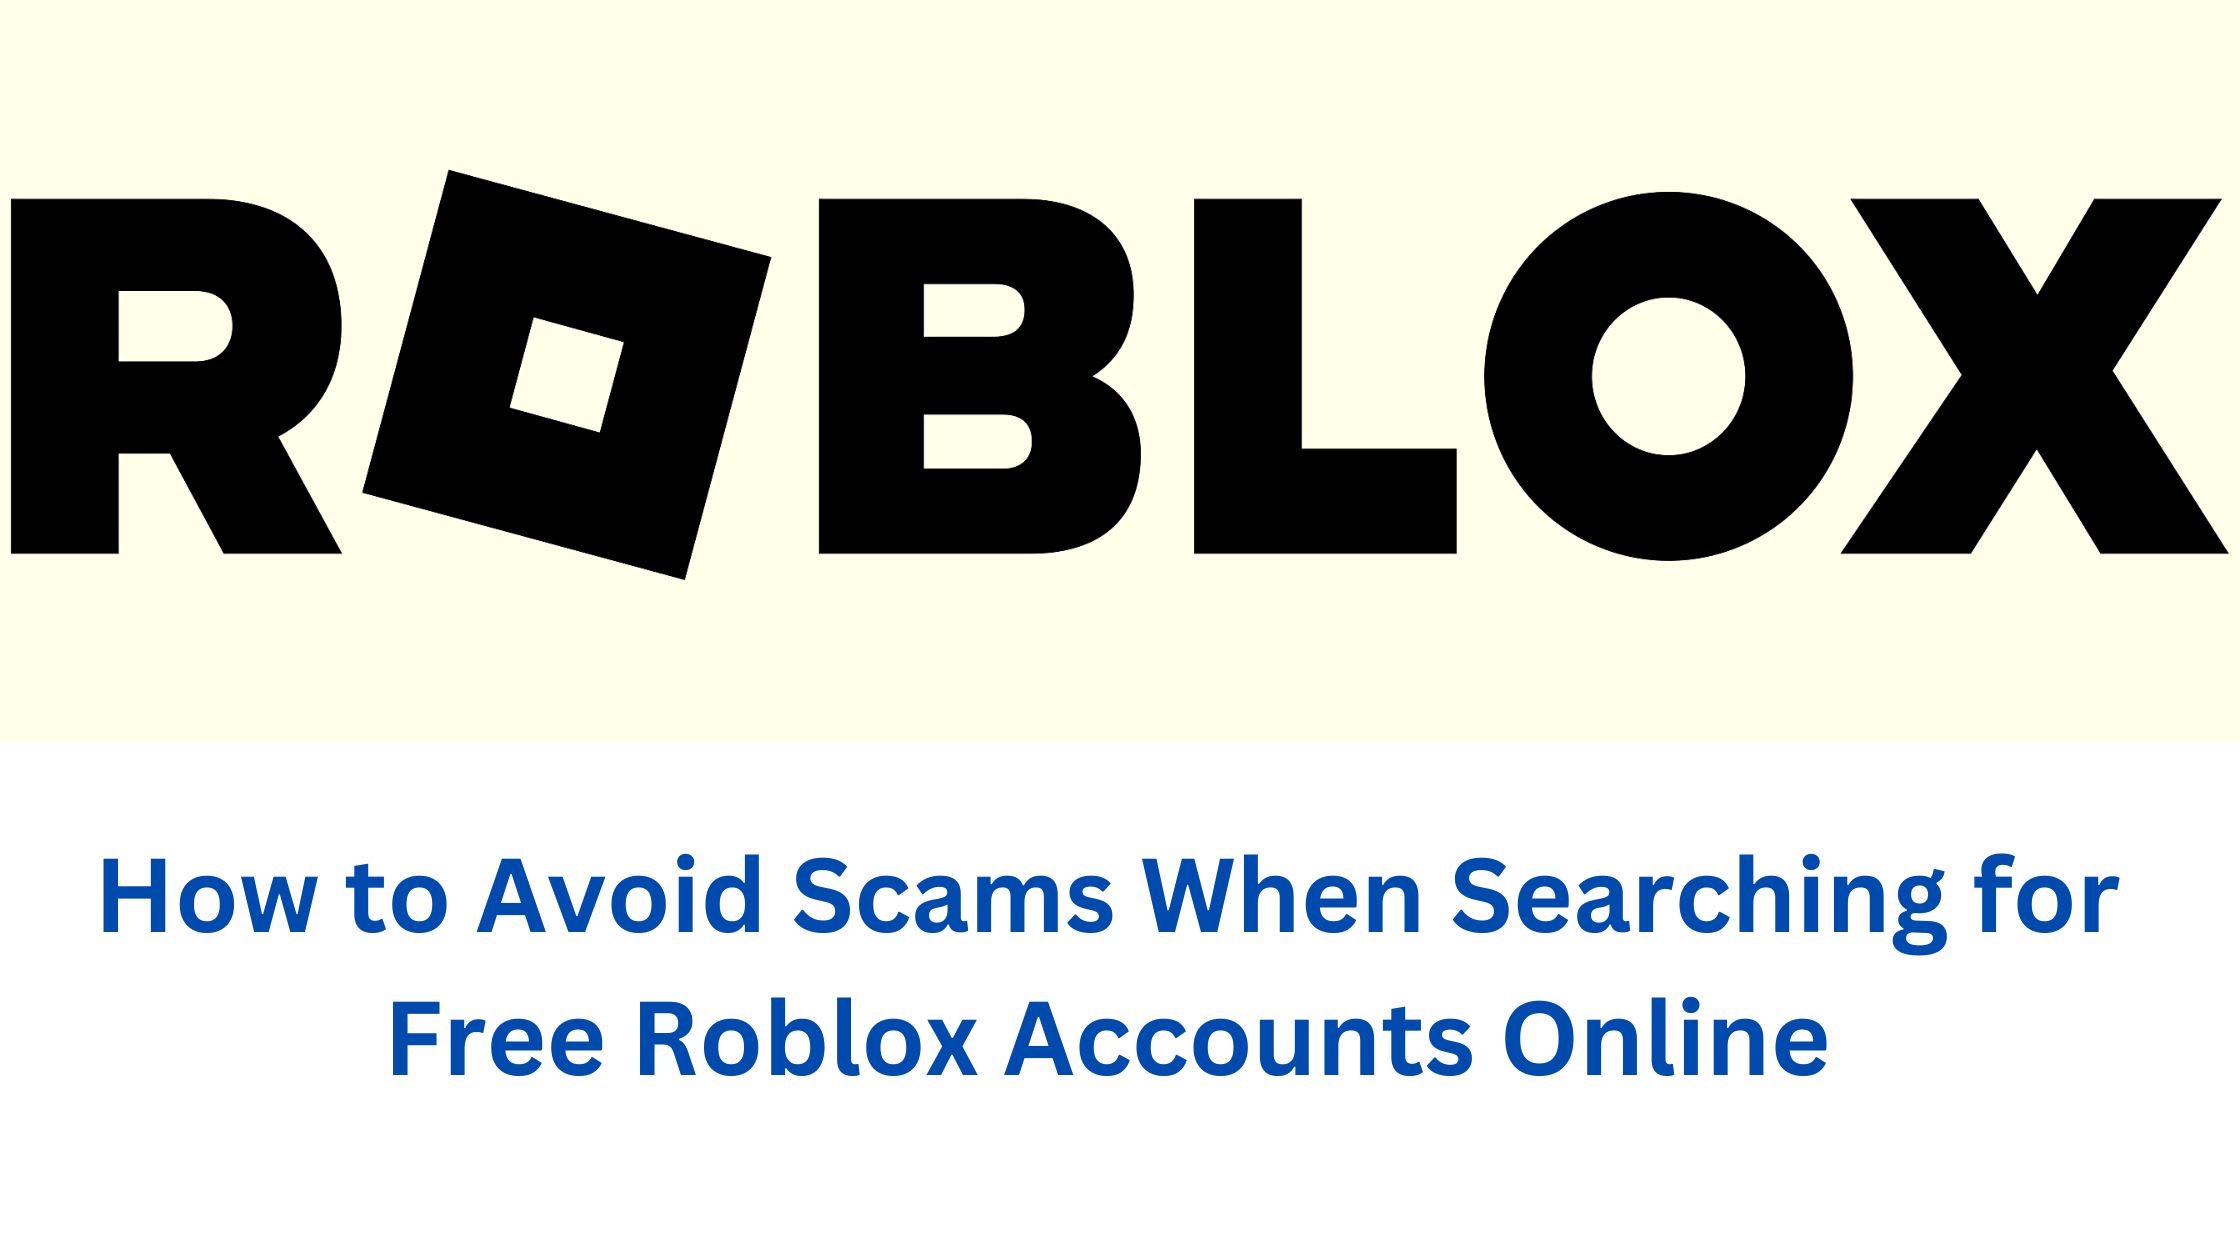 Roblox Free Robux And Accounts